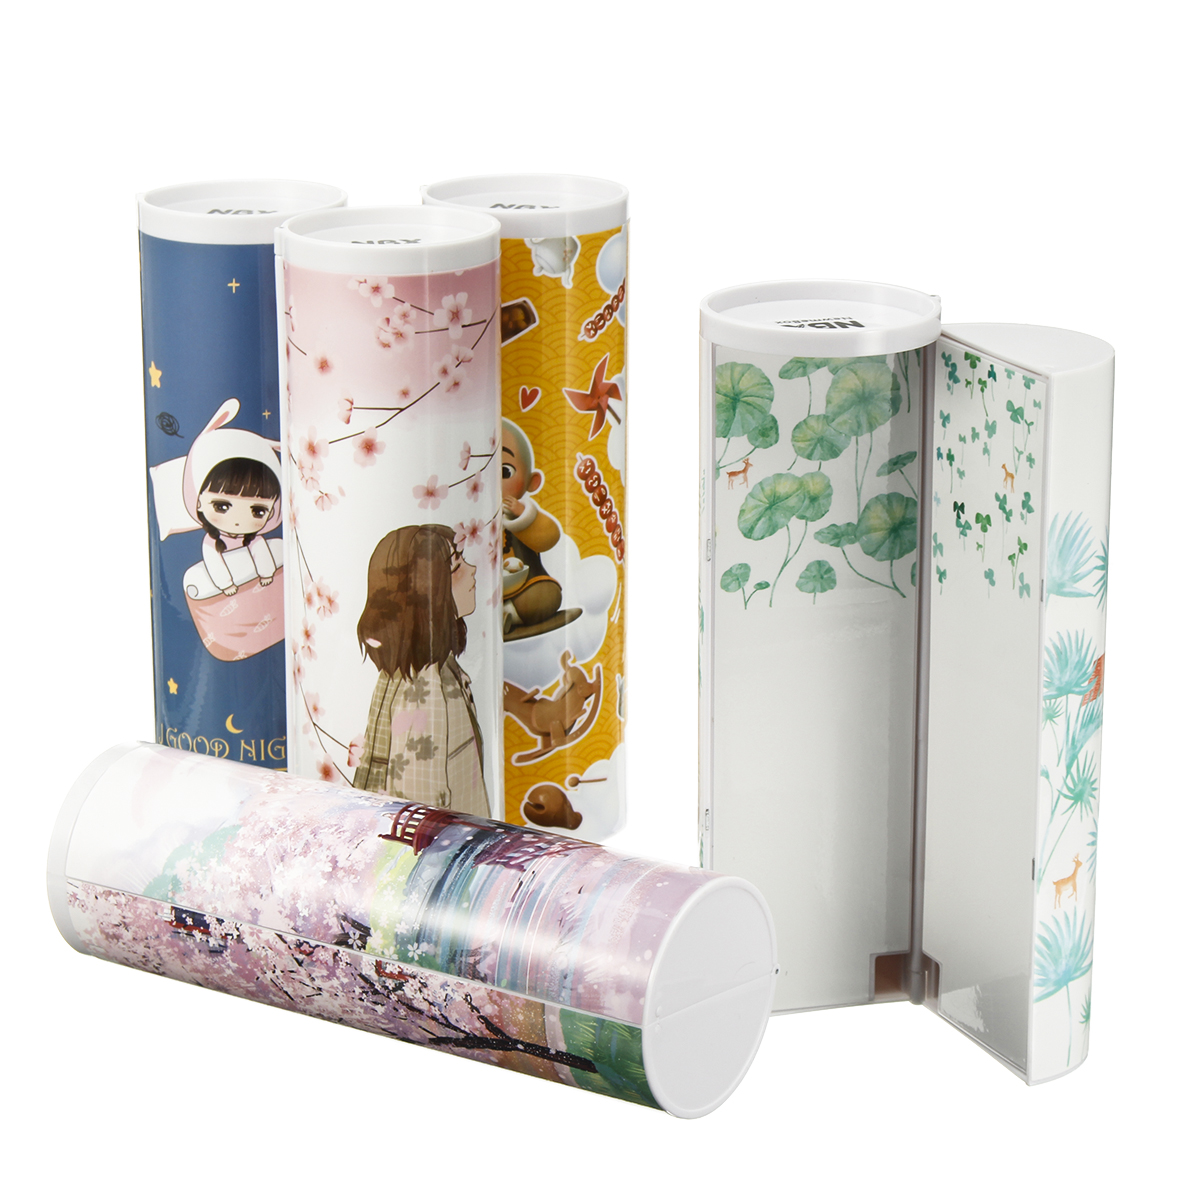 Find Cartoon Pencil Box Large Capacity Pencil Case Cylindrical Pencil Box Multifunction Stationery Box School Supplies for Sale on Gipsybee.com with cryptocurrencies